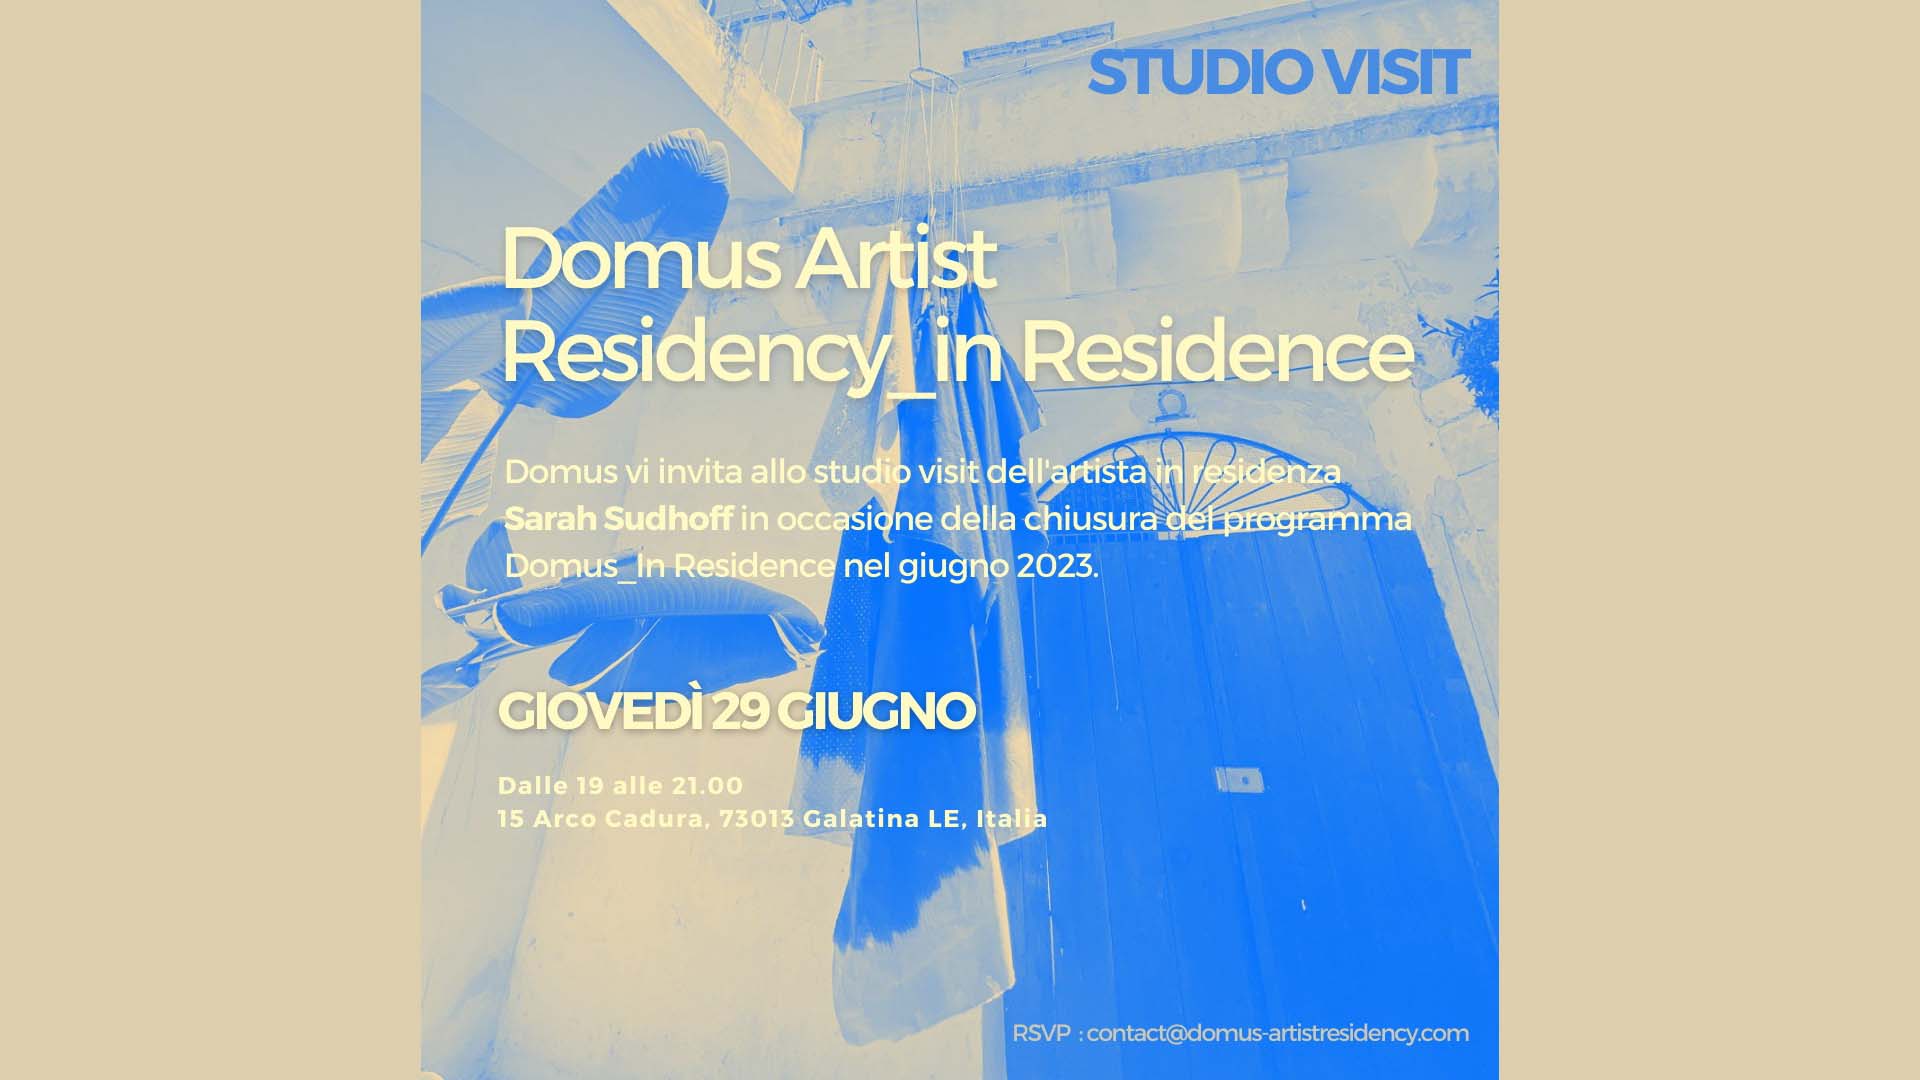 Domus Artist Residency “The Past is Ever Present”